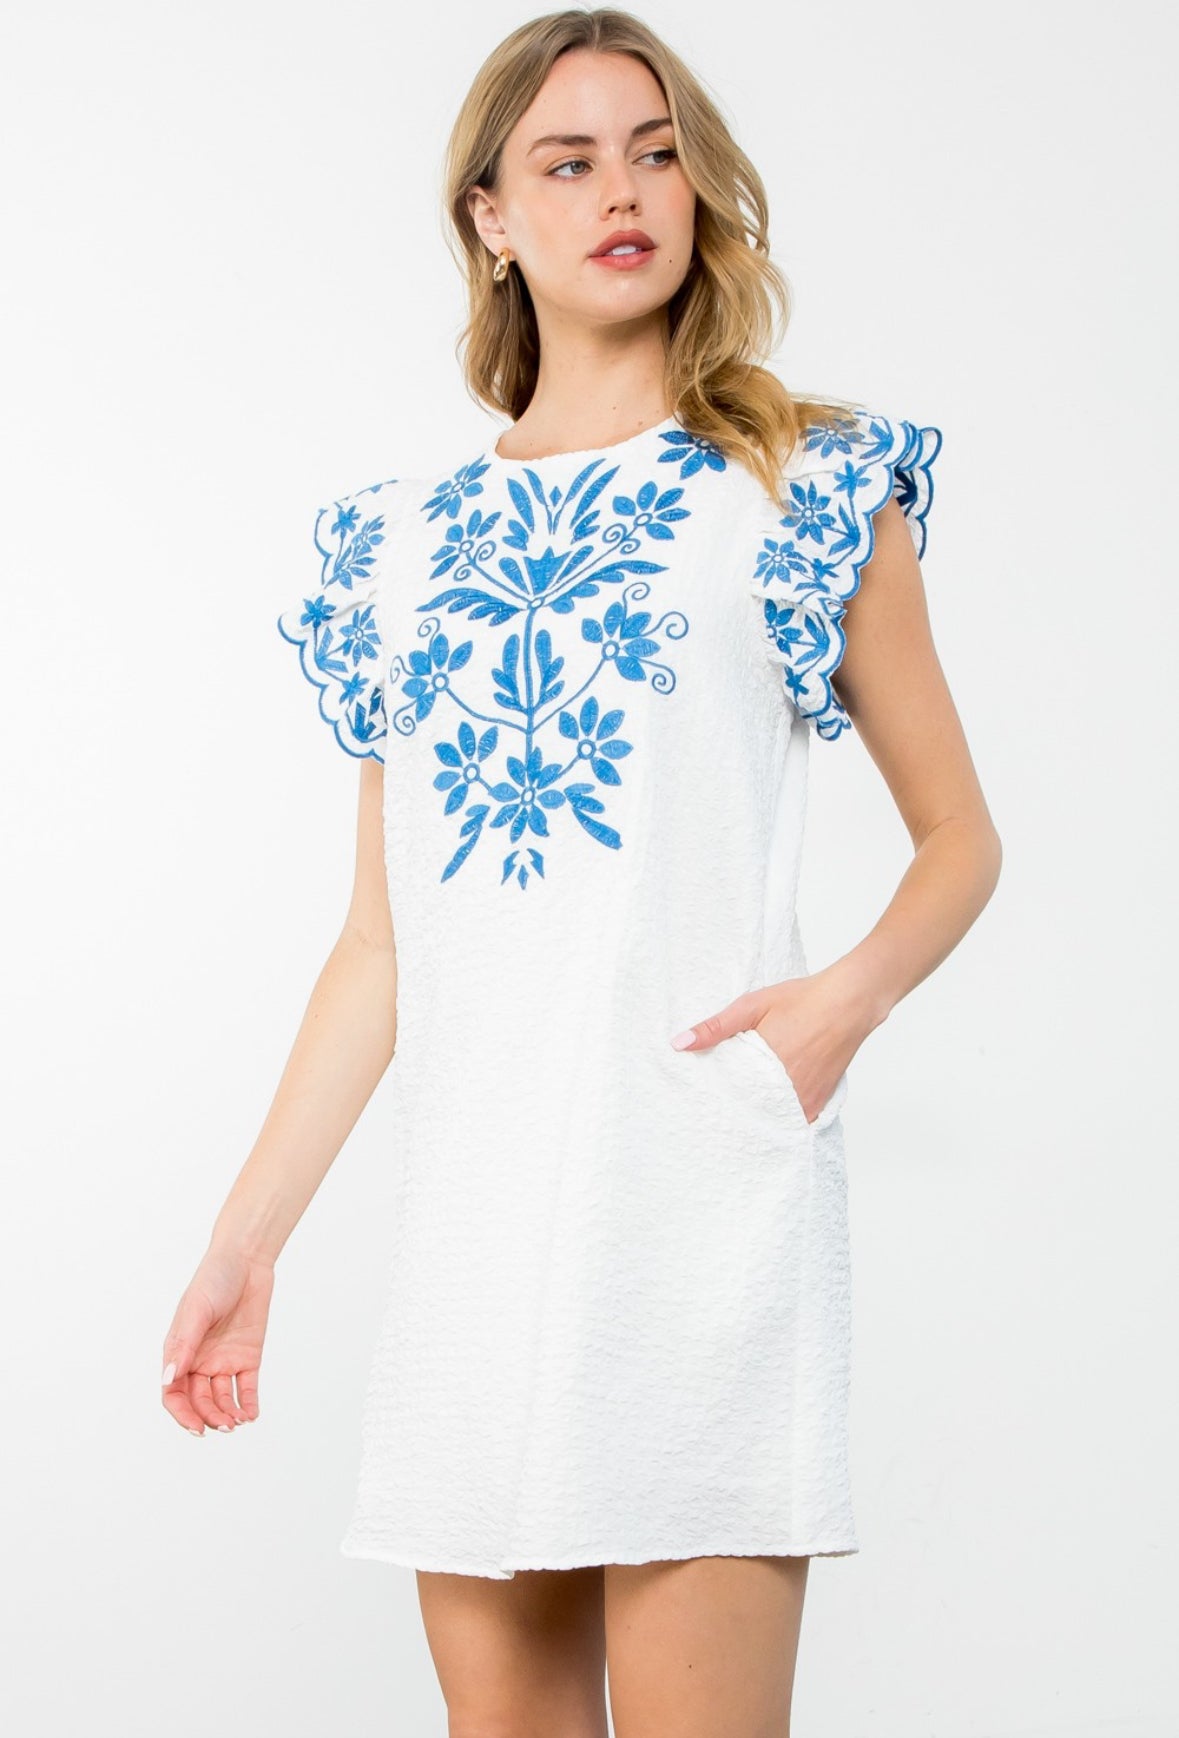 White + Blue Embroidered Dress